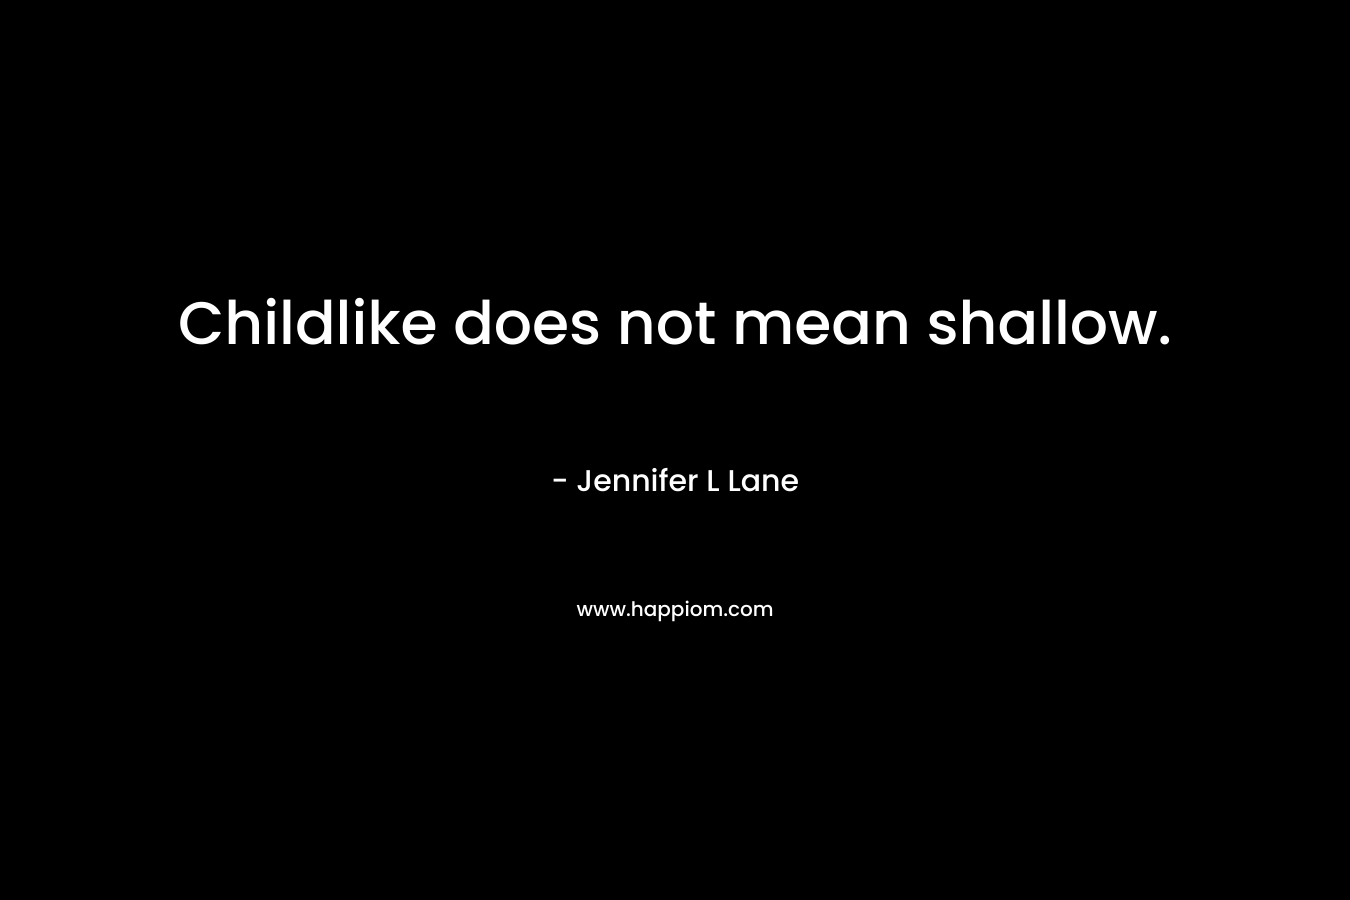 Childlike does not mean shallow.